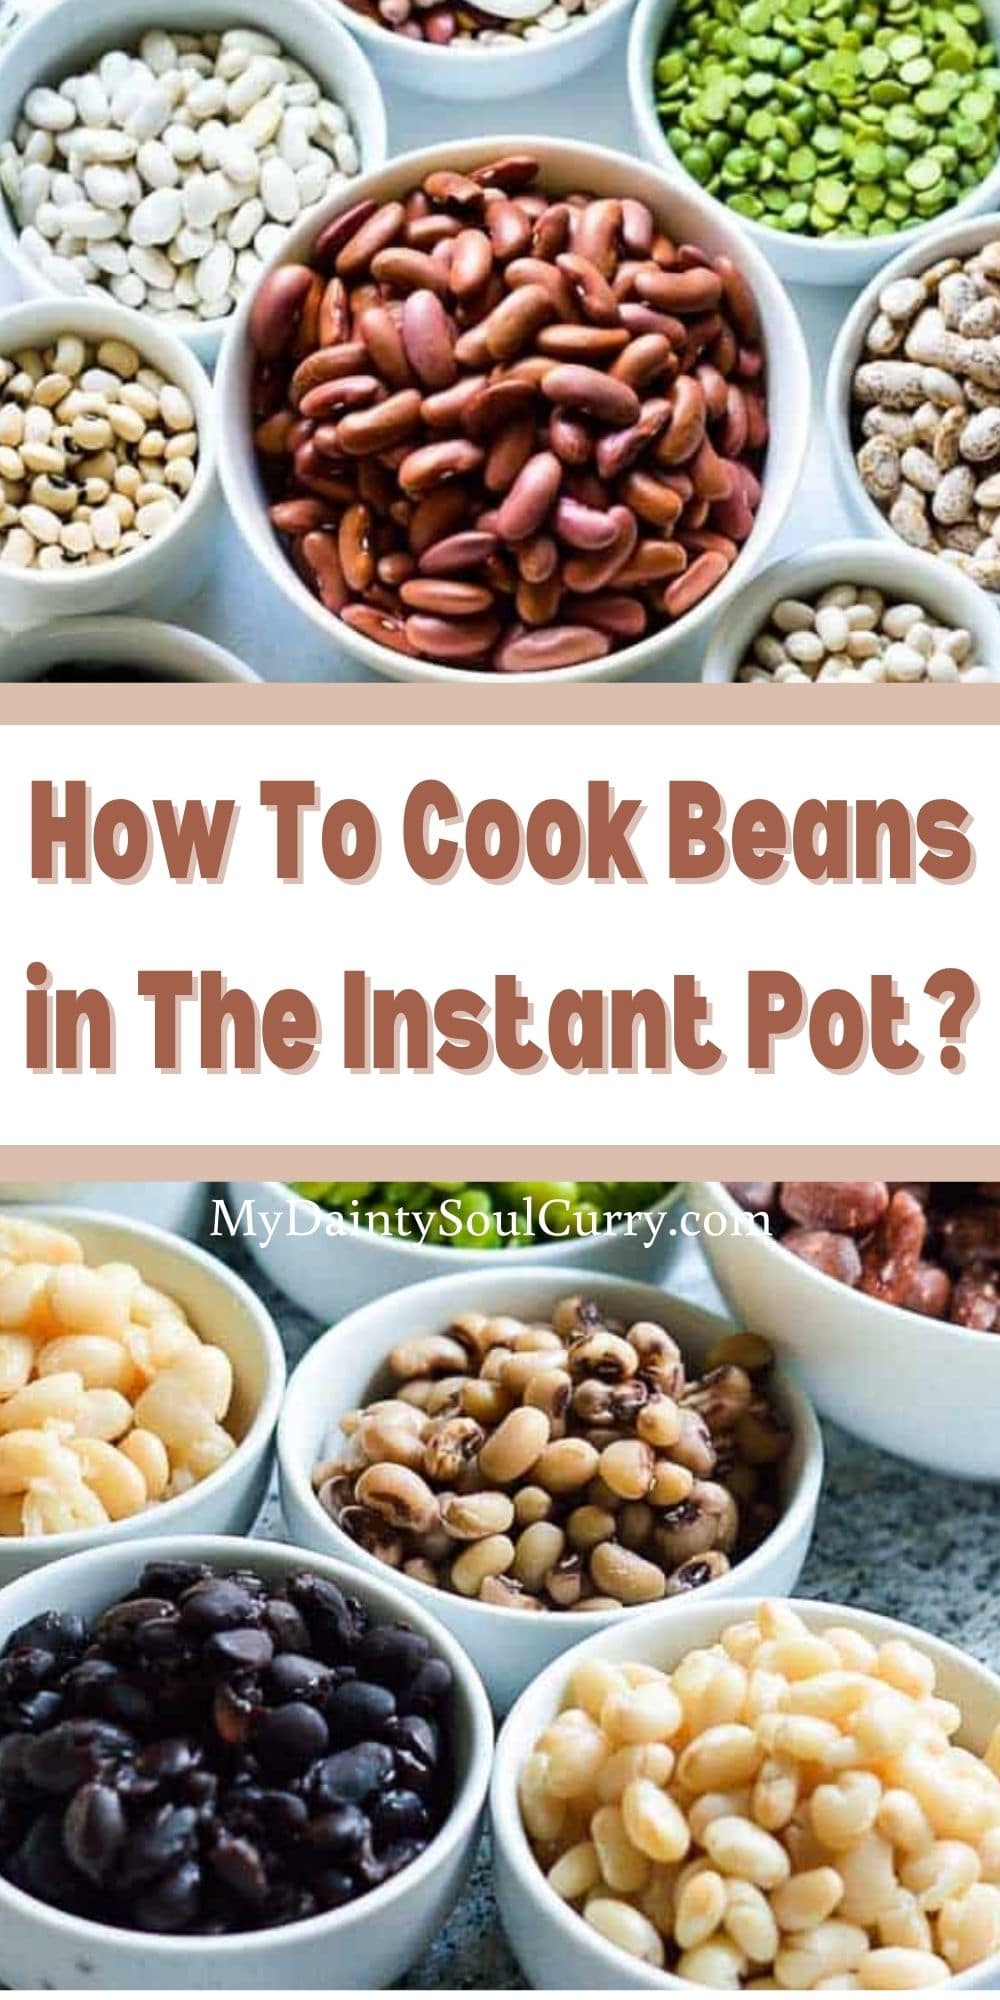 How To Cook Beans in The Instant Pot?(Instant Pot Beans) - My Dainty ...